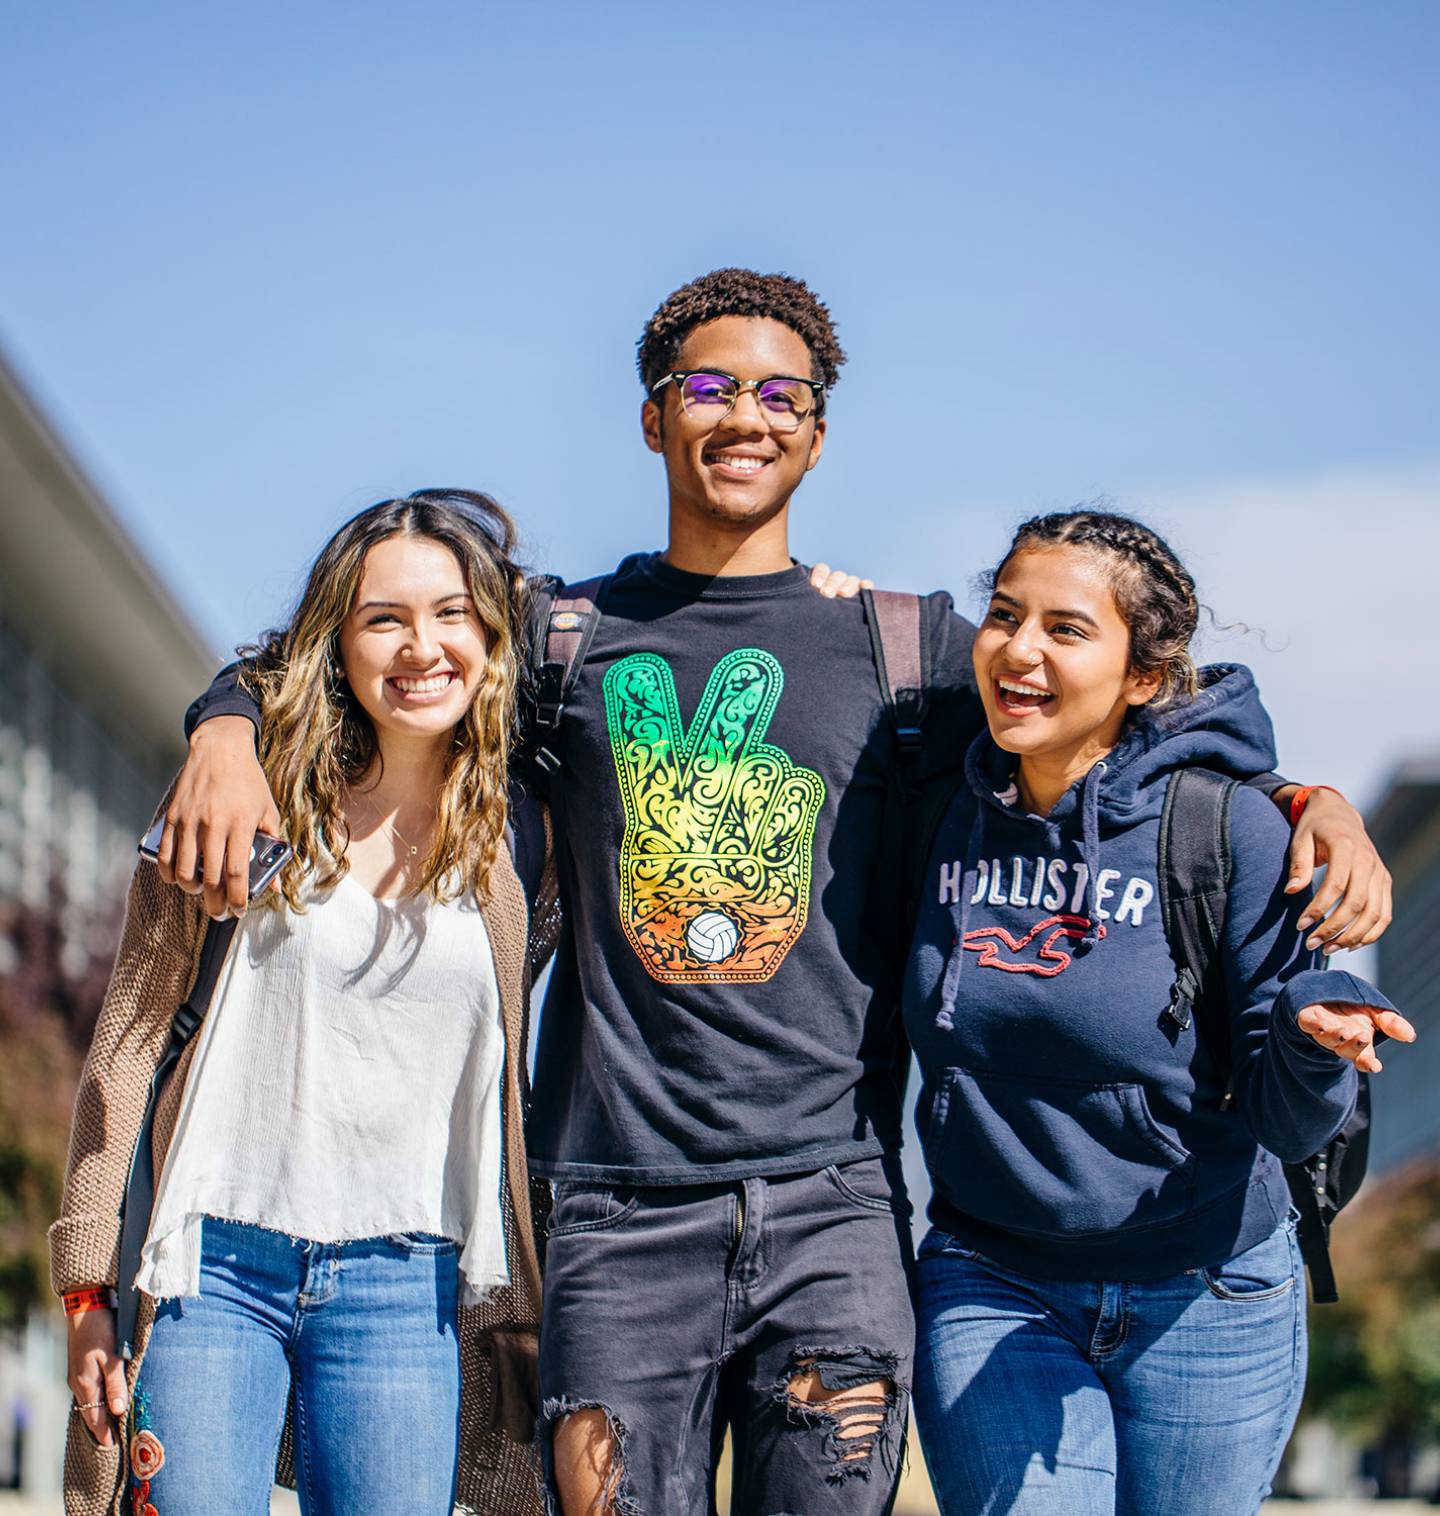 Three students with their arms around each other walking on campus